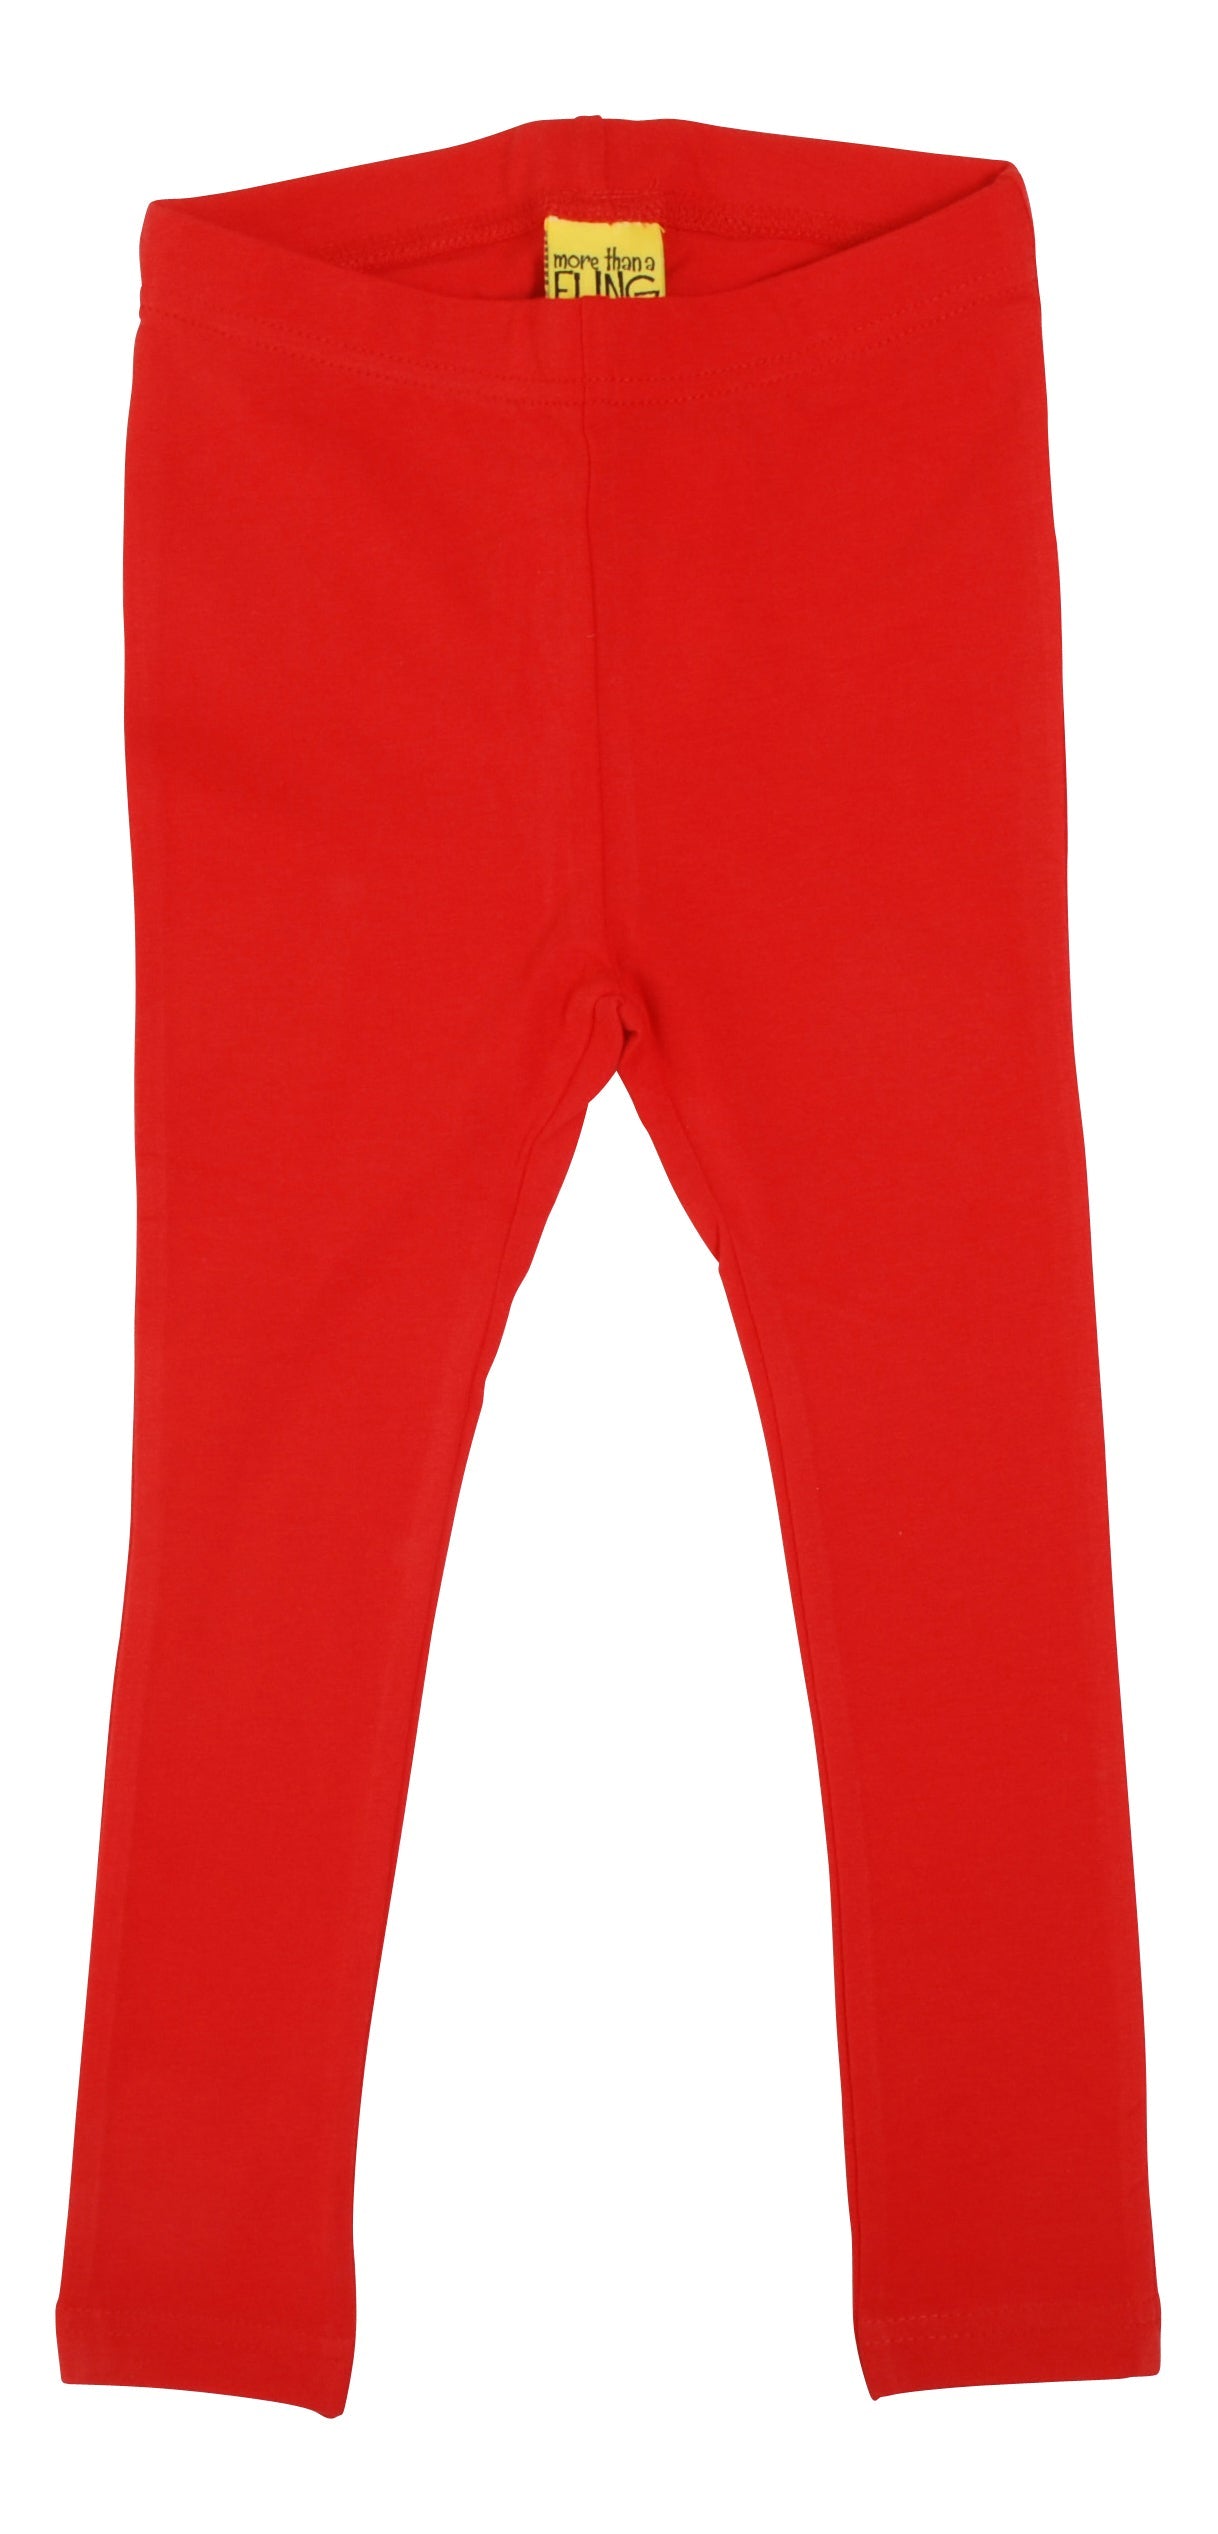 Legging Solid Poppy Red - More than a Fling (Duns Sweden)